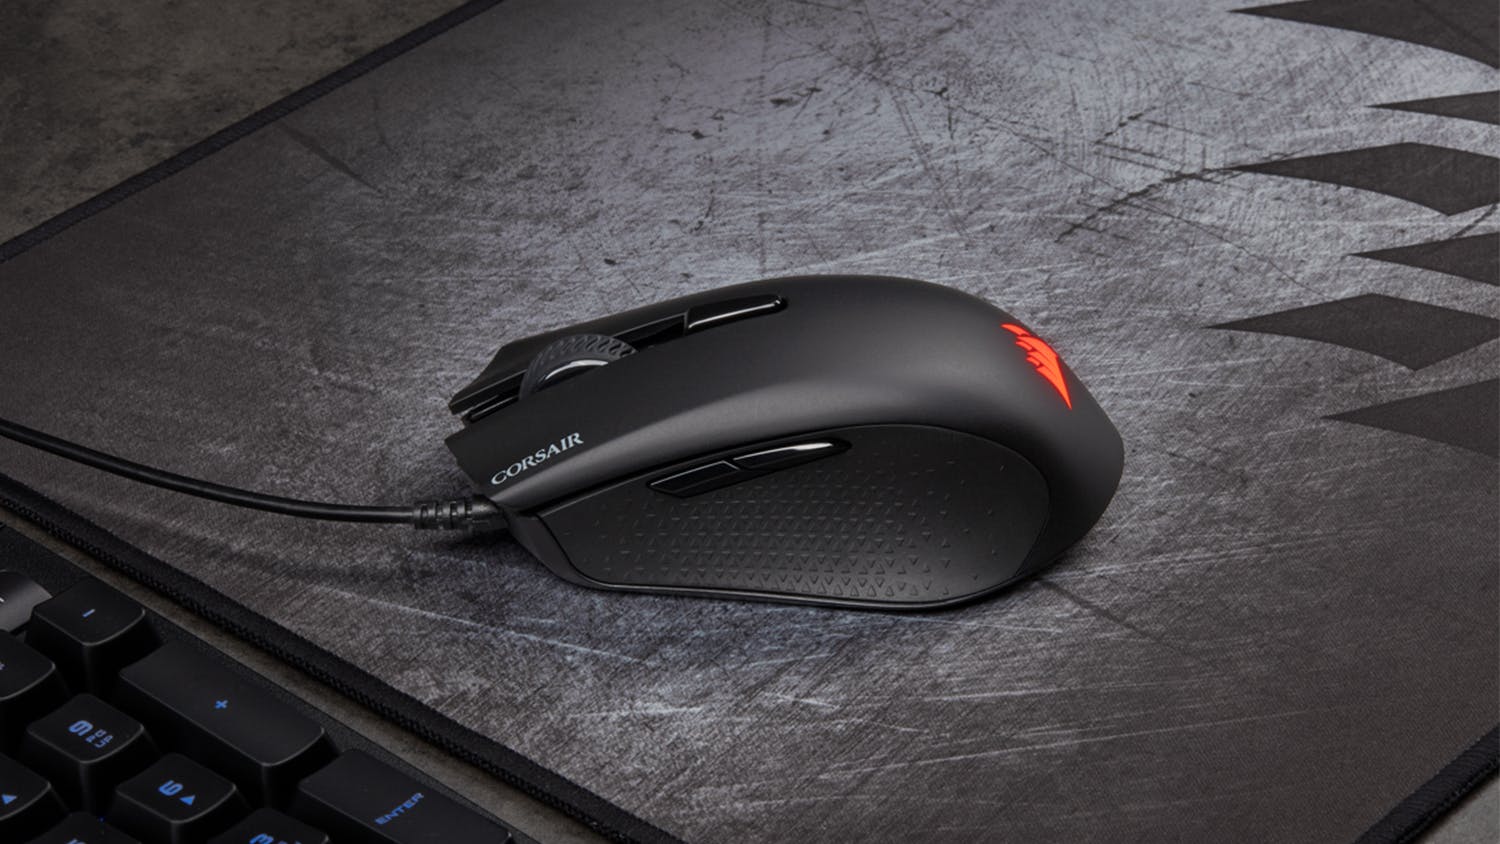 CORSAIR Harpoon RGB Pro Wired Gaming Mouse